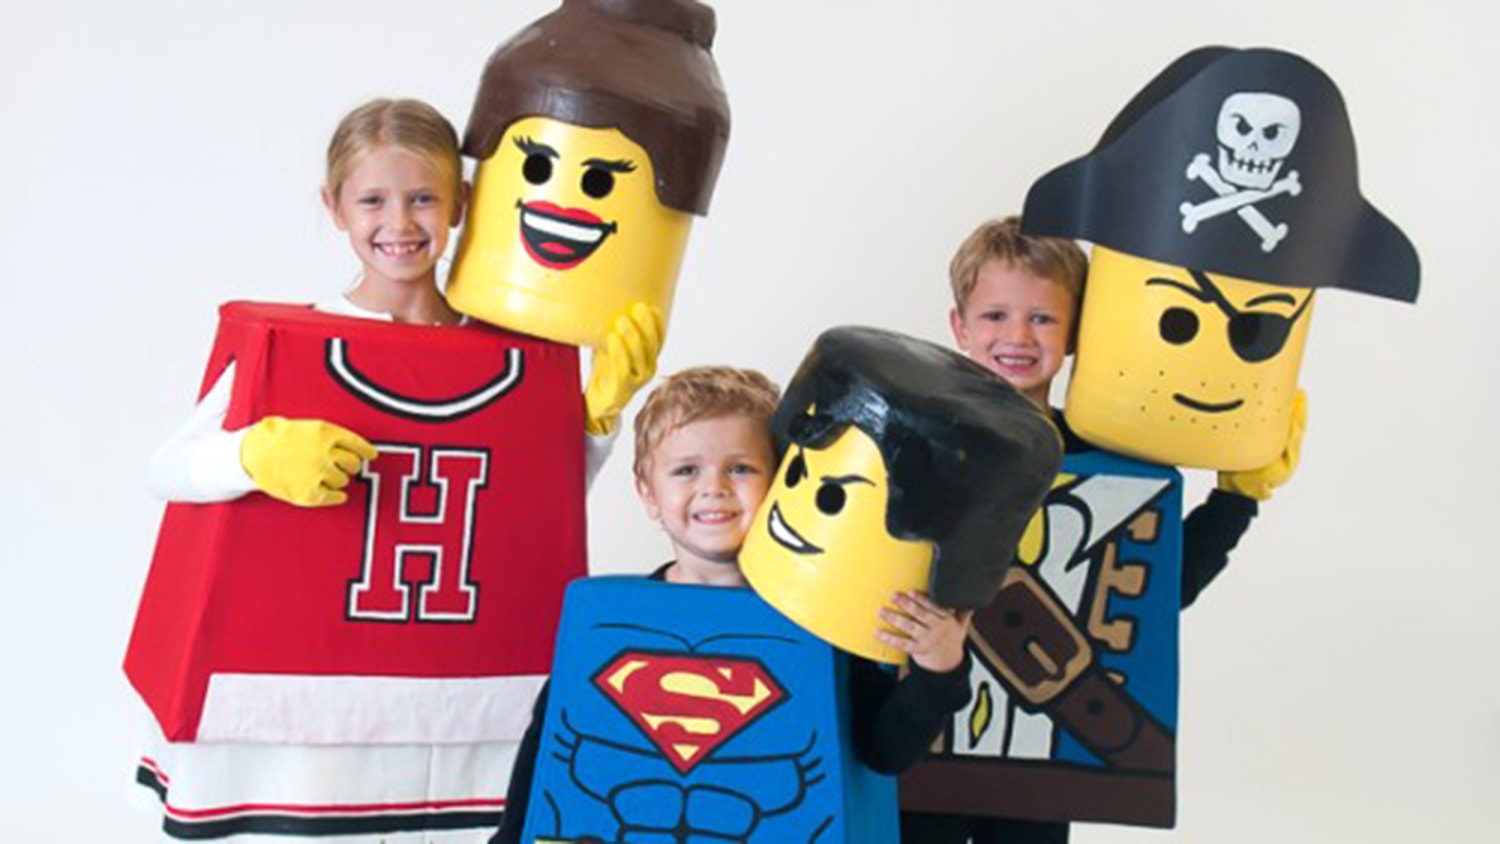 Dad wins Halloween with amazing Lego costume for his son